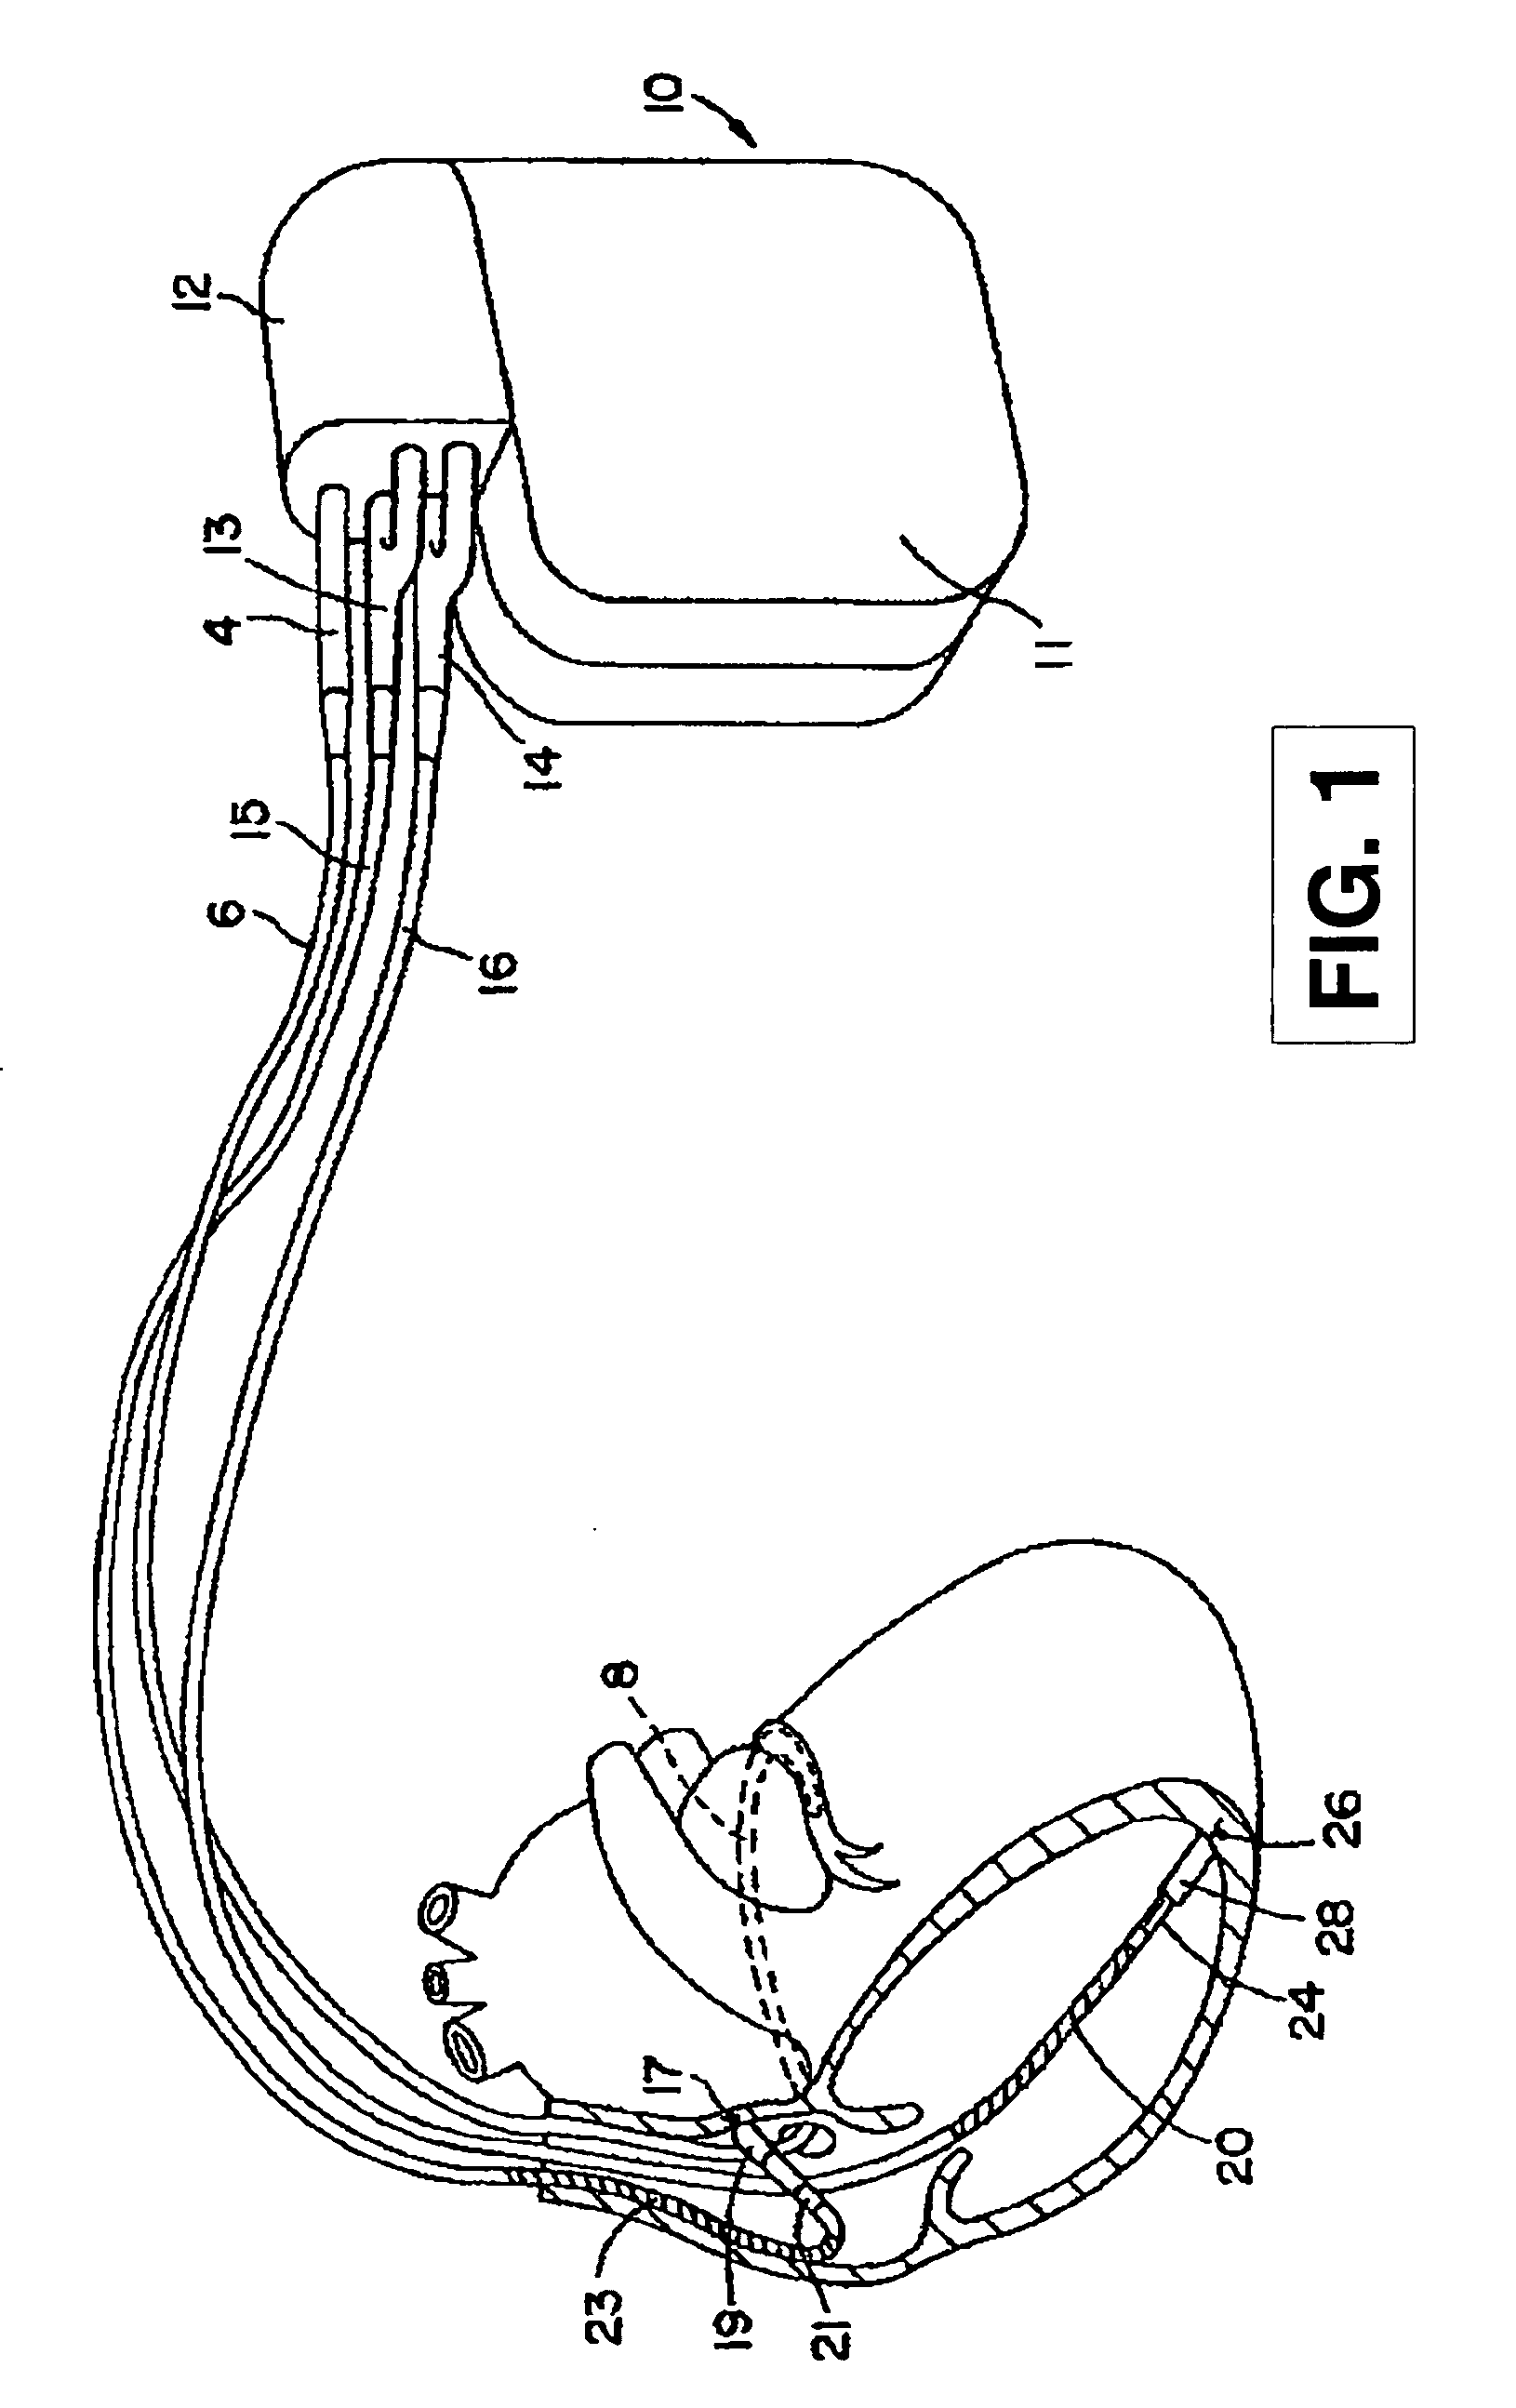 Method and apparatus for detecting and discriminating arrhythmias